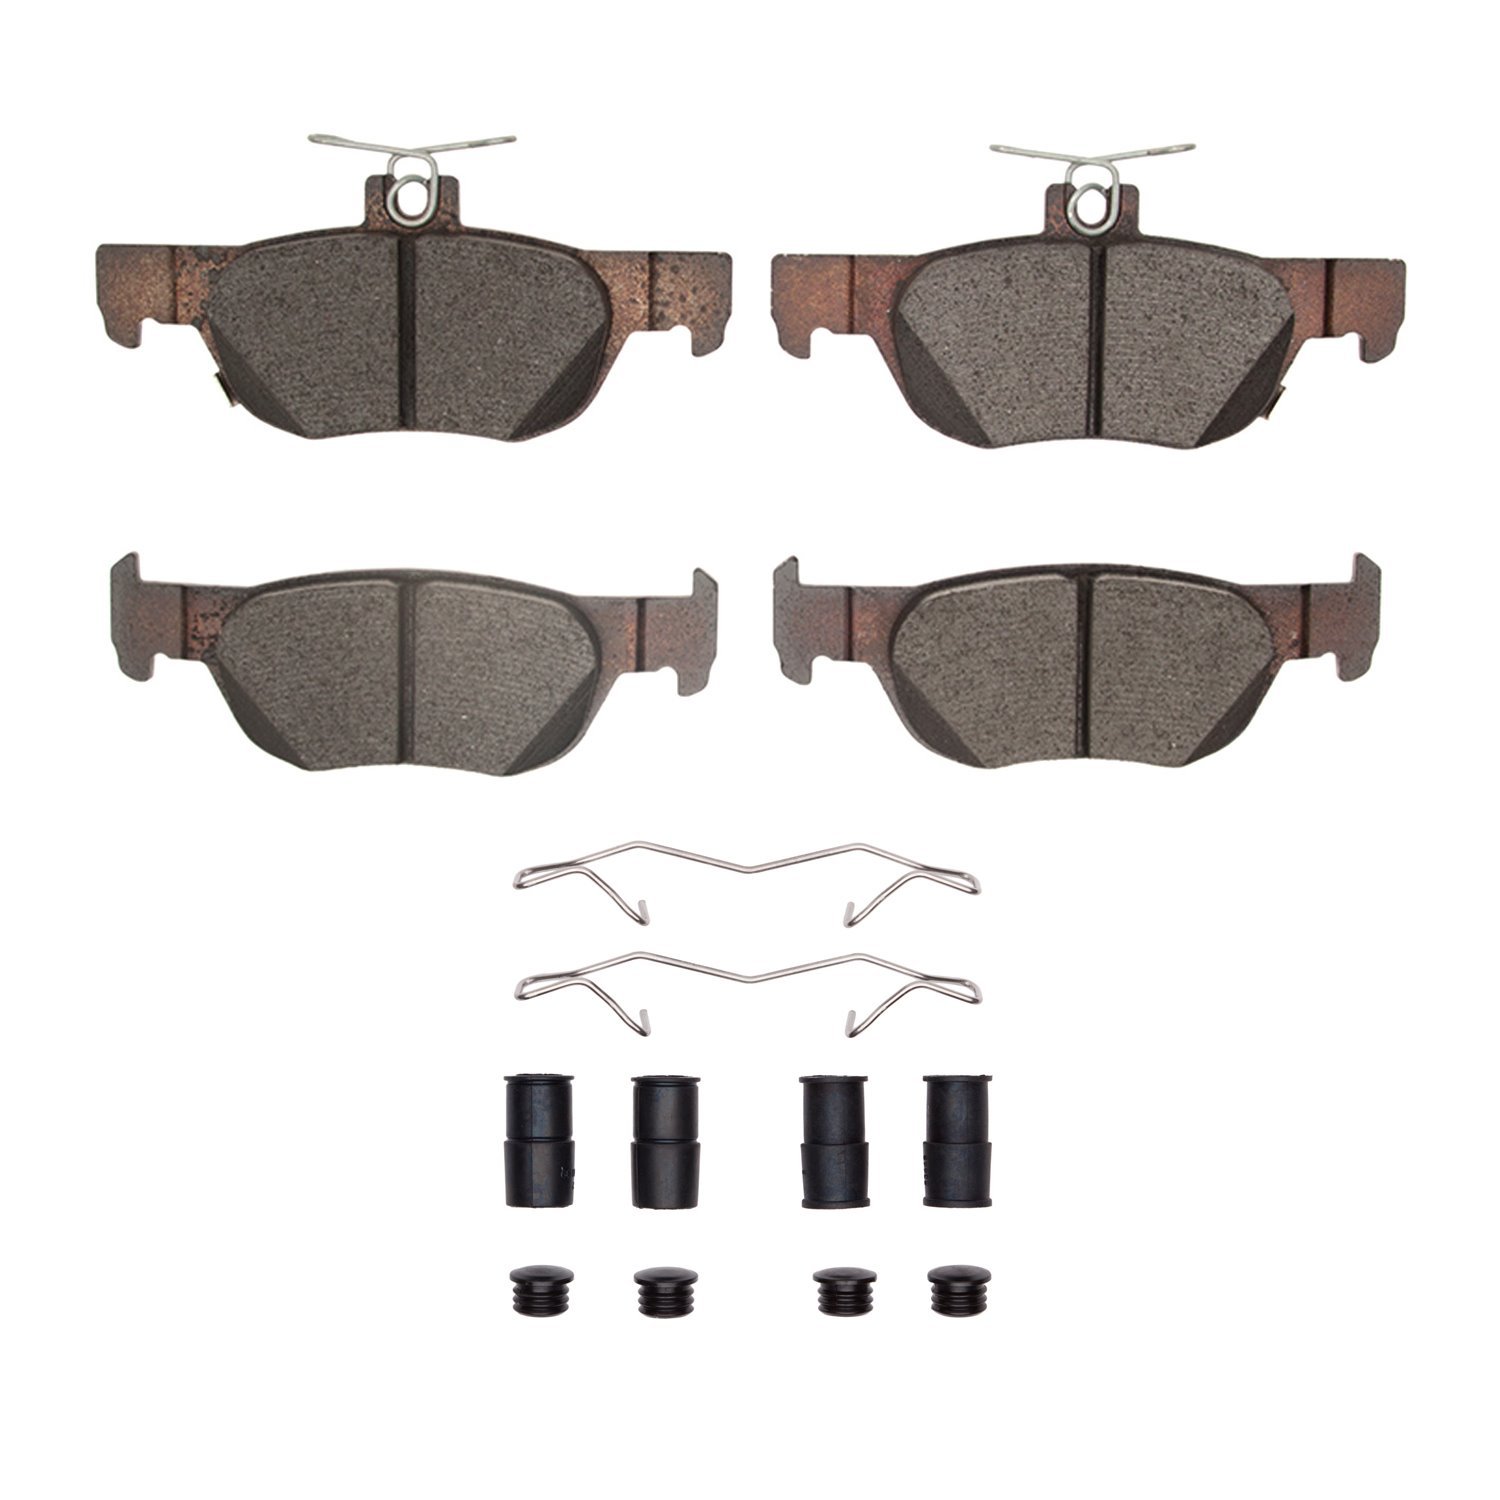 1310-2219-01 3000-Series Ceramic Brake Pads & Hardware Kit, Fits Select Ford/Lincoln/Mercury/Mazda, Position: Rear